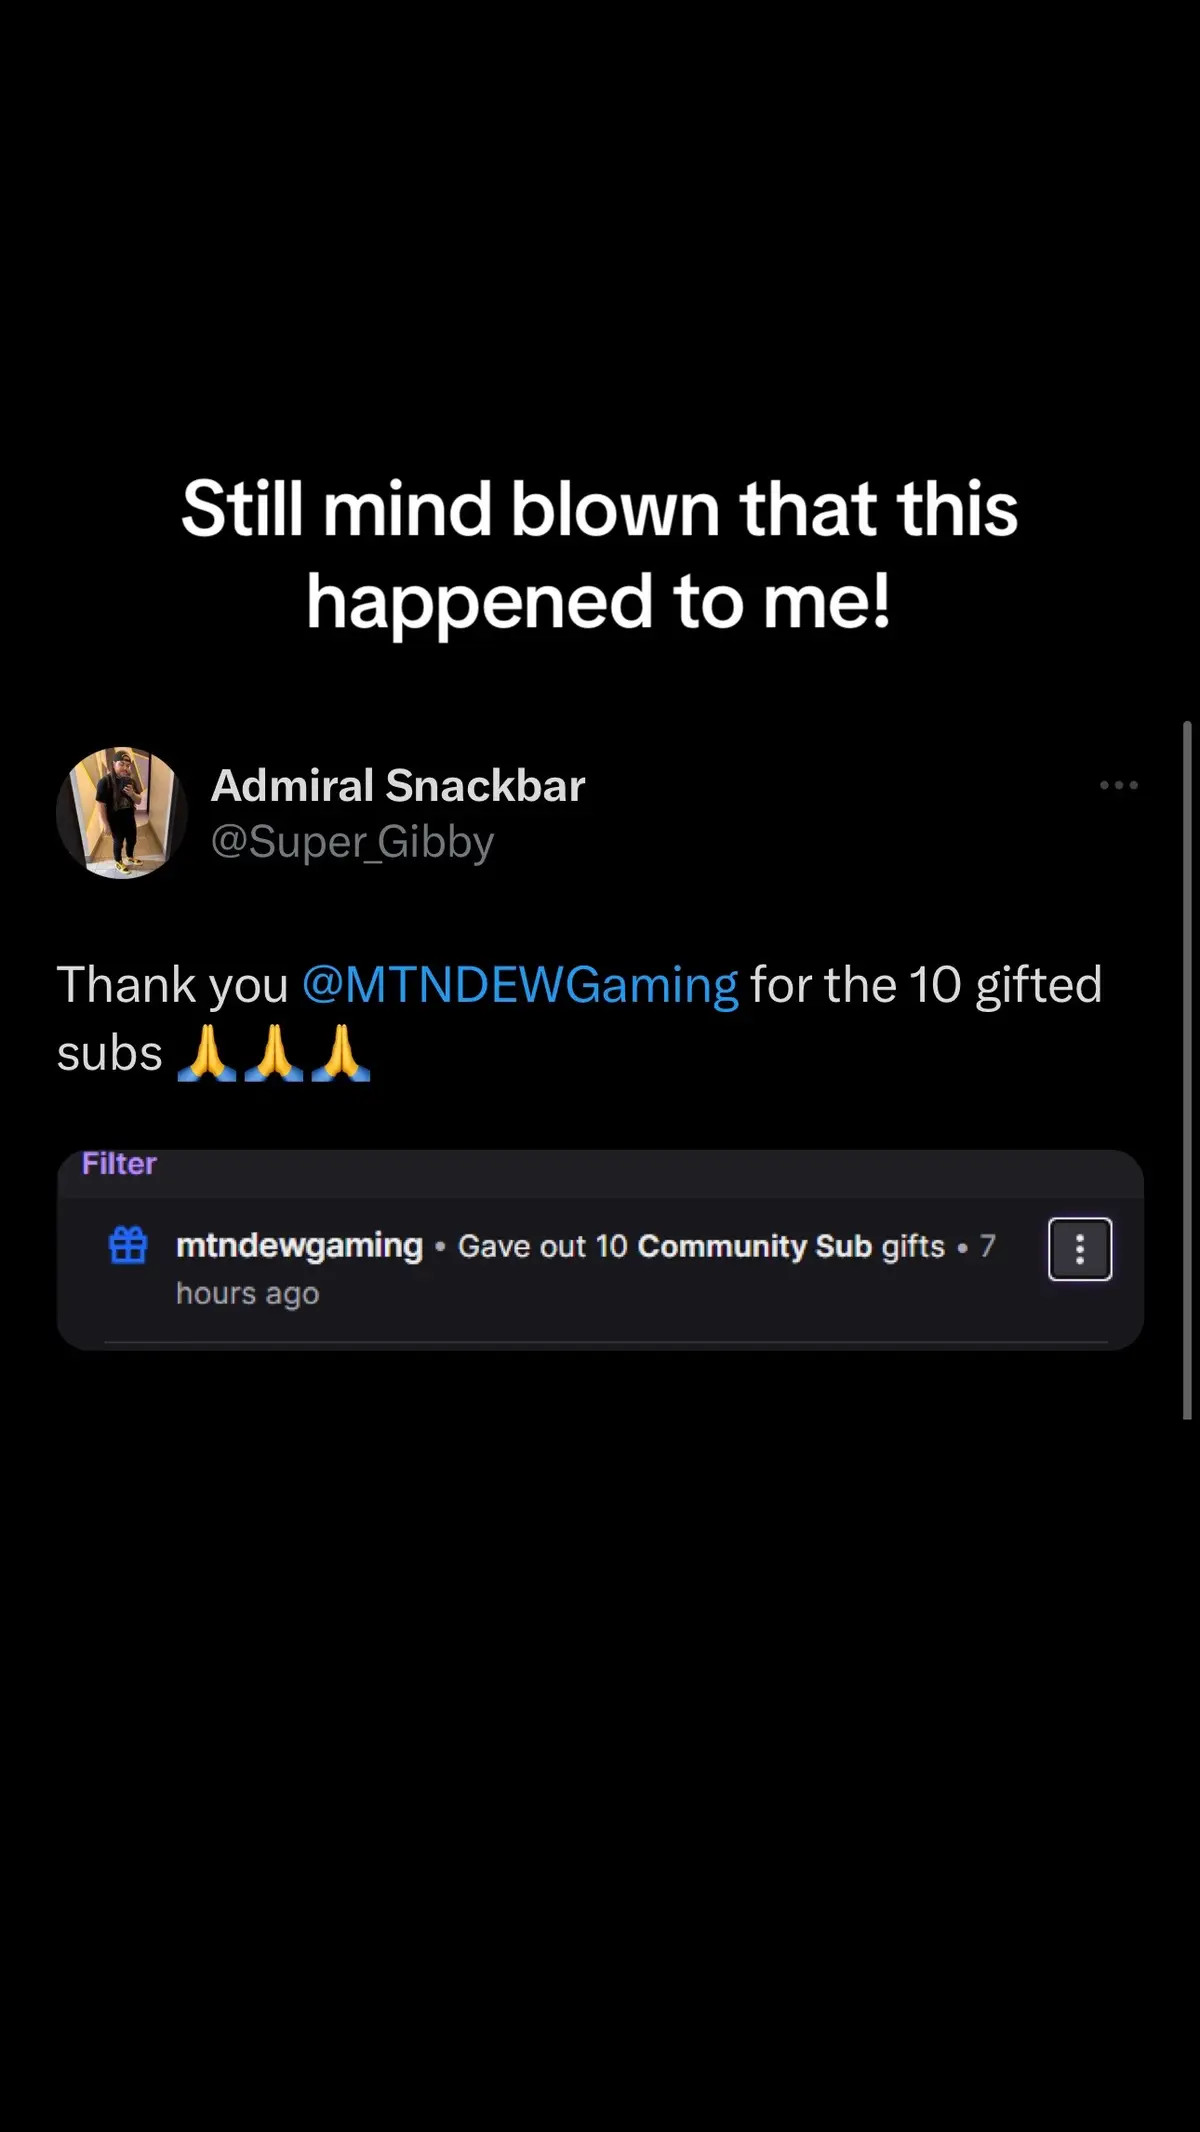 @MTN DEW Gaming gifted me 10 subs on Twitch and that is so crazy to me! #twitch #streamer #dothedew #streamingcommunity #twitchstreamer #twitchtok #streamertok 